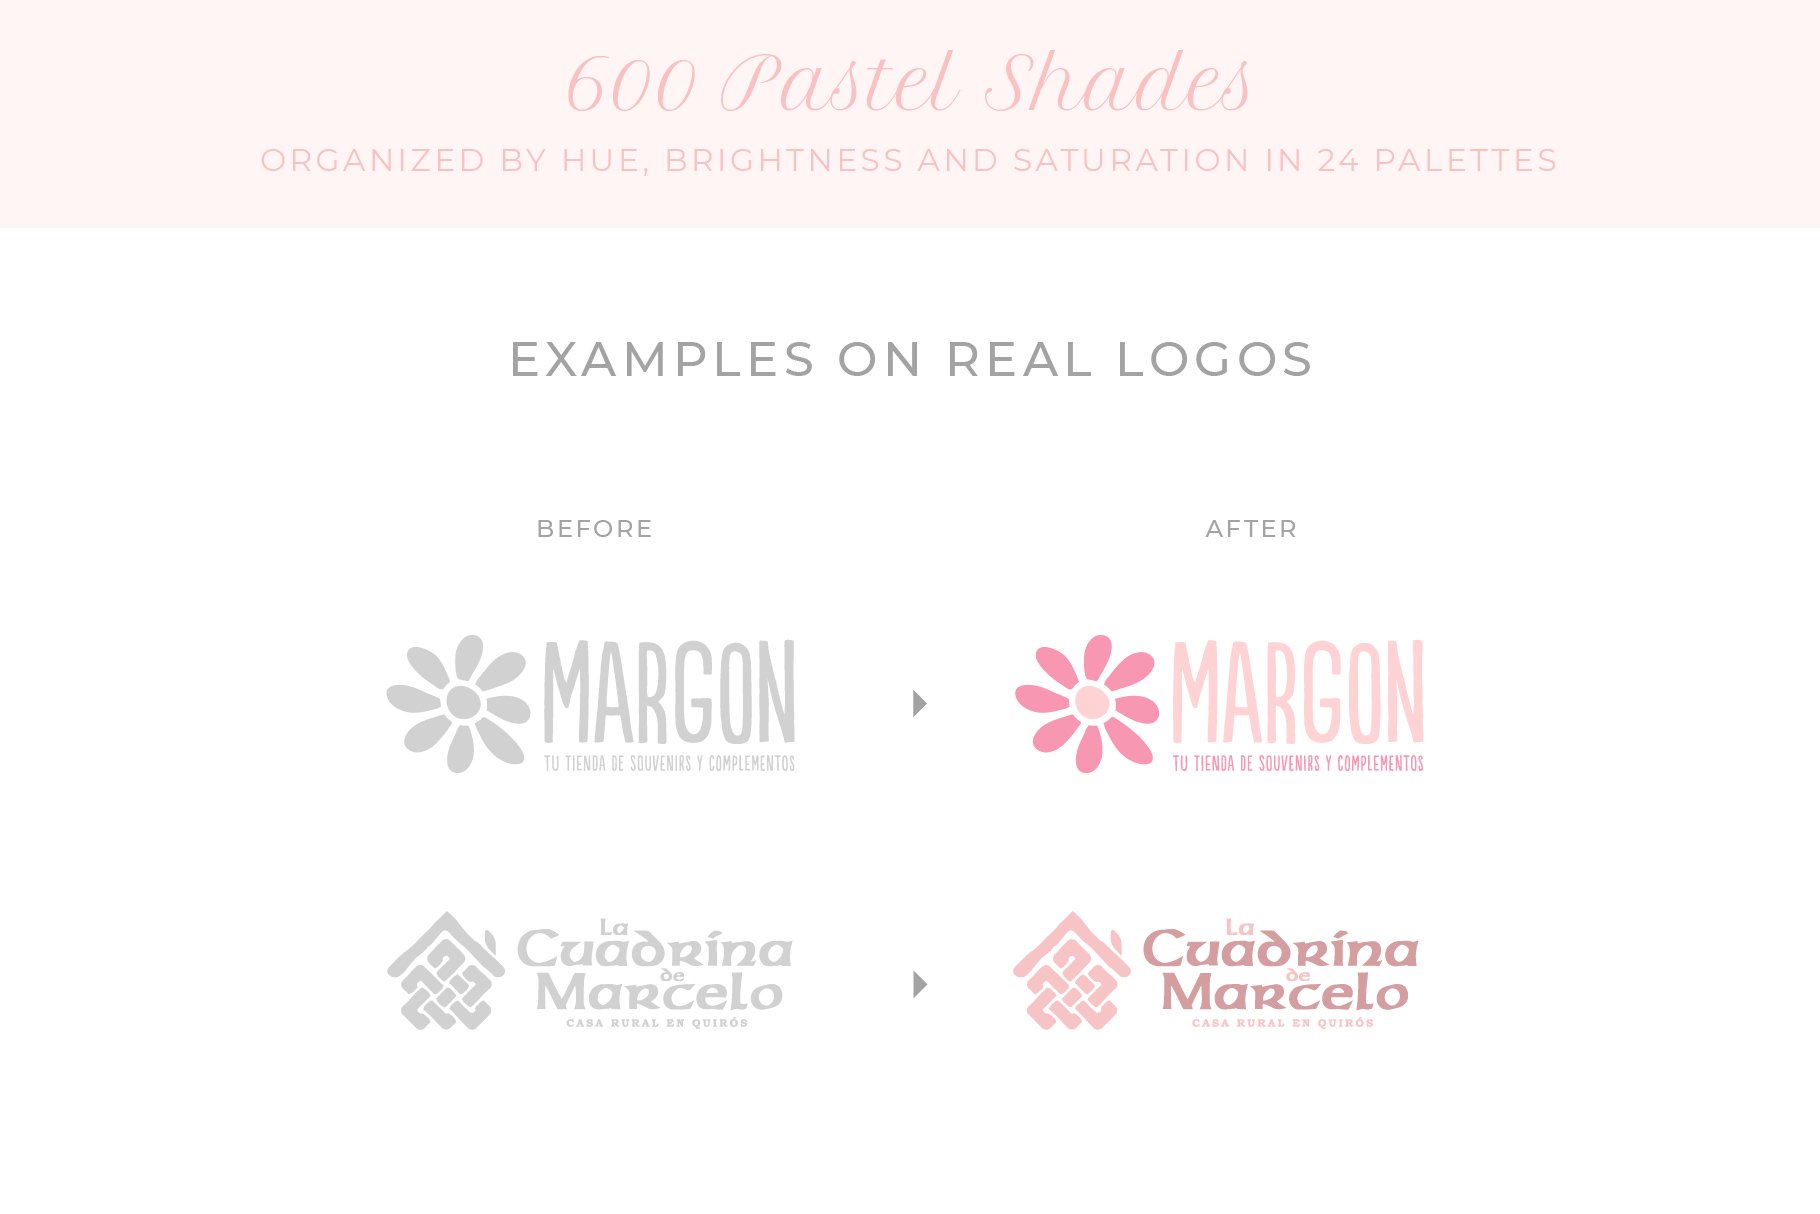 600colorswatches pastelshades final 04 logoexamples 877